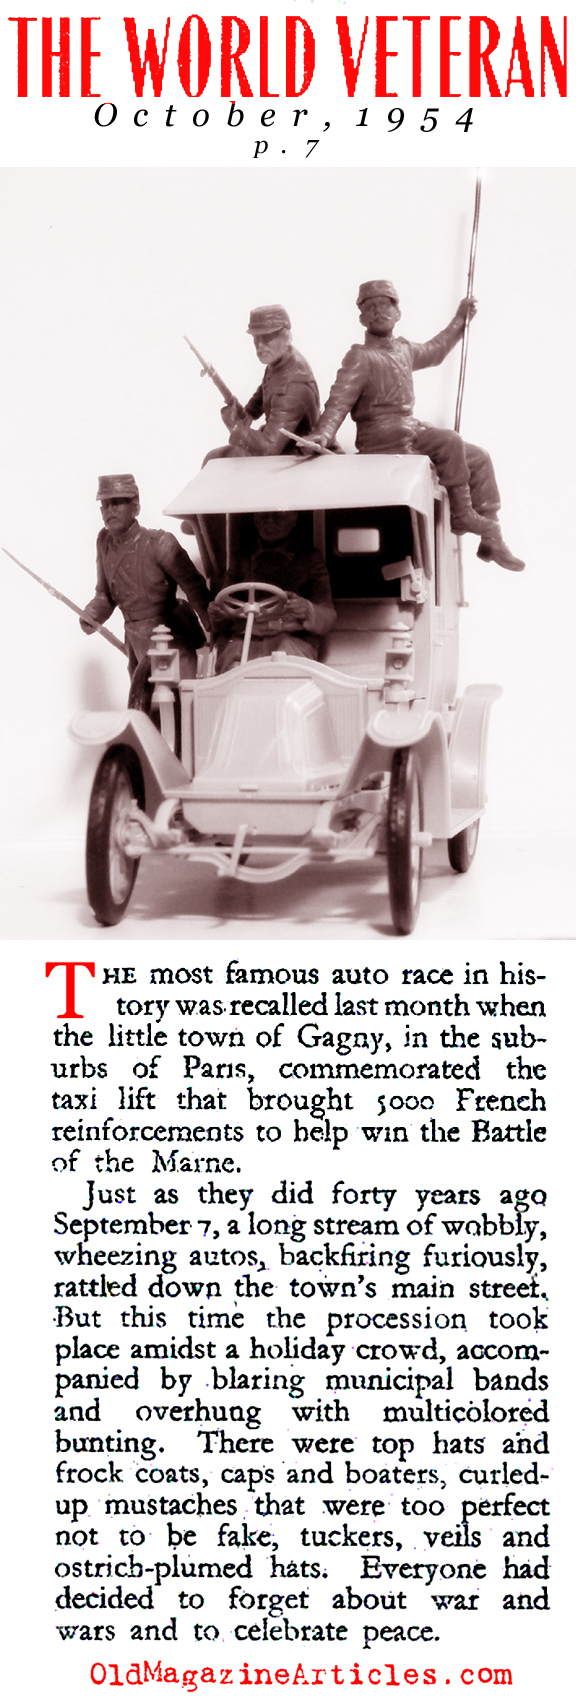 The Taxis of the Marne (The World Veteran, 1954)